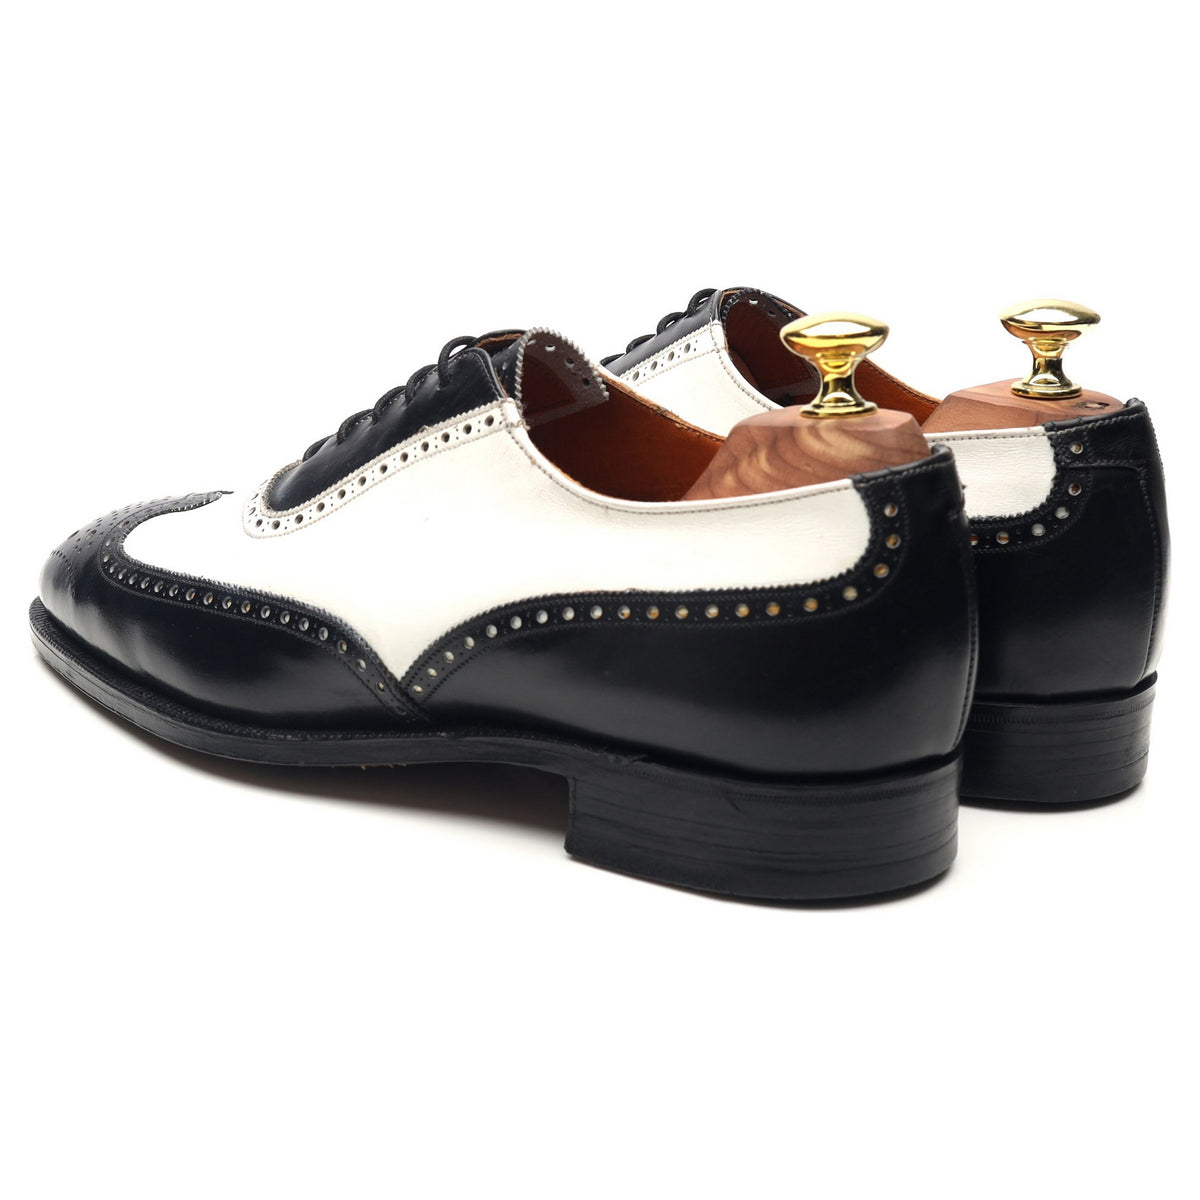 Vintage Two Tone Black White Leather Brogues UK 7 EE